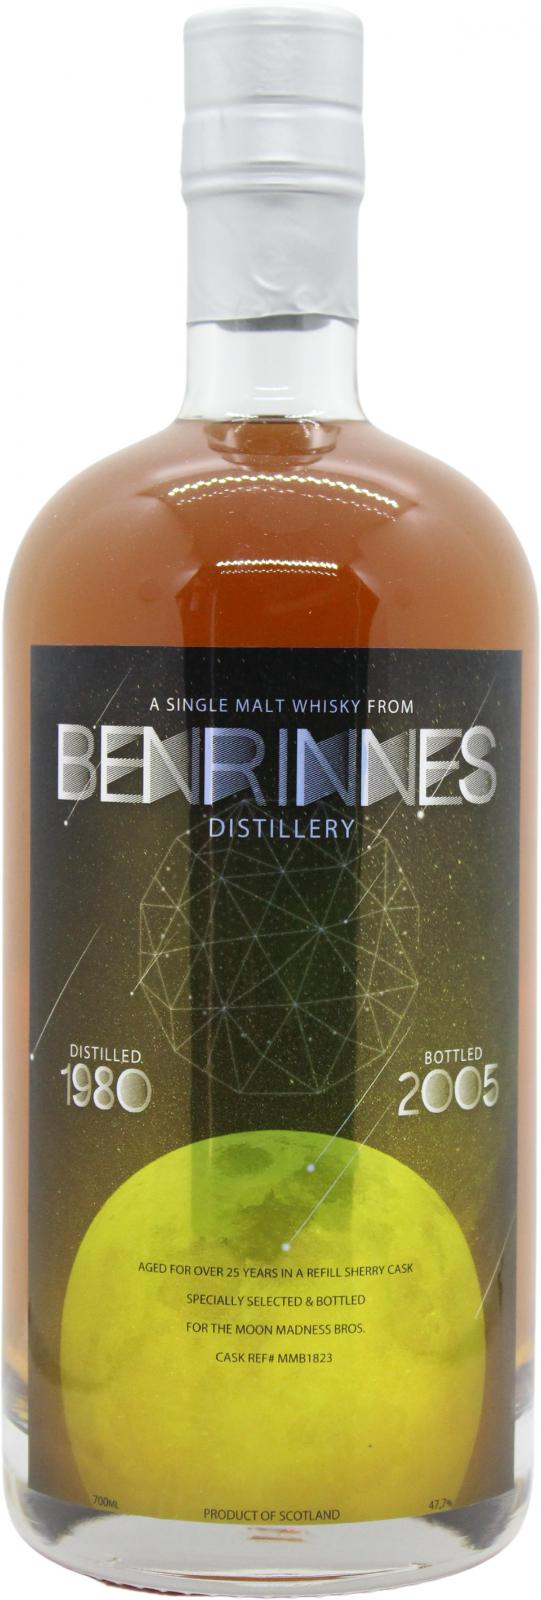 Benrinnes 1980 UD The Moon Madness Bros Refill Sherry Cask MMB1823 Private Bottling 47.7% 700ml